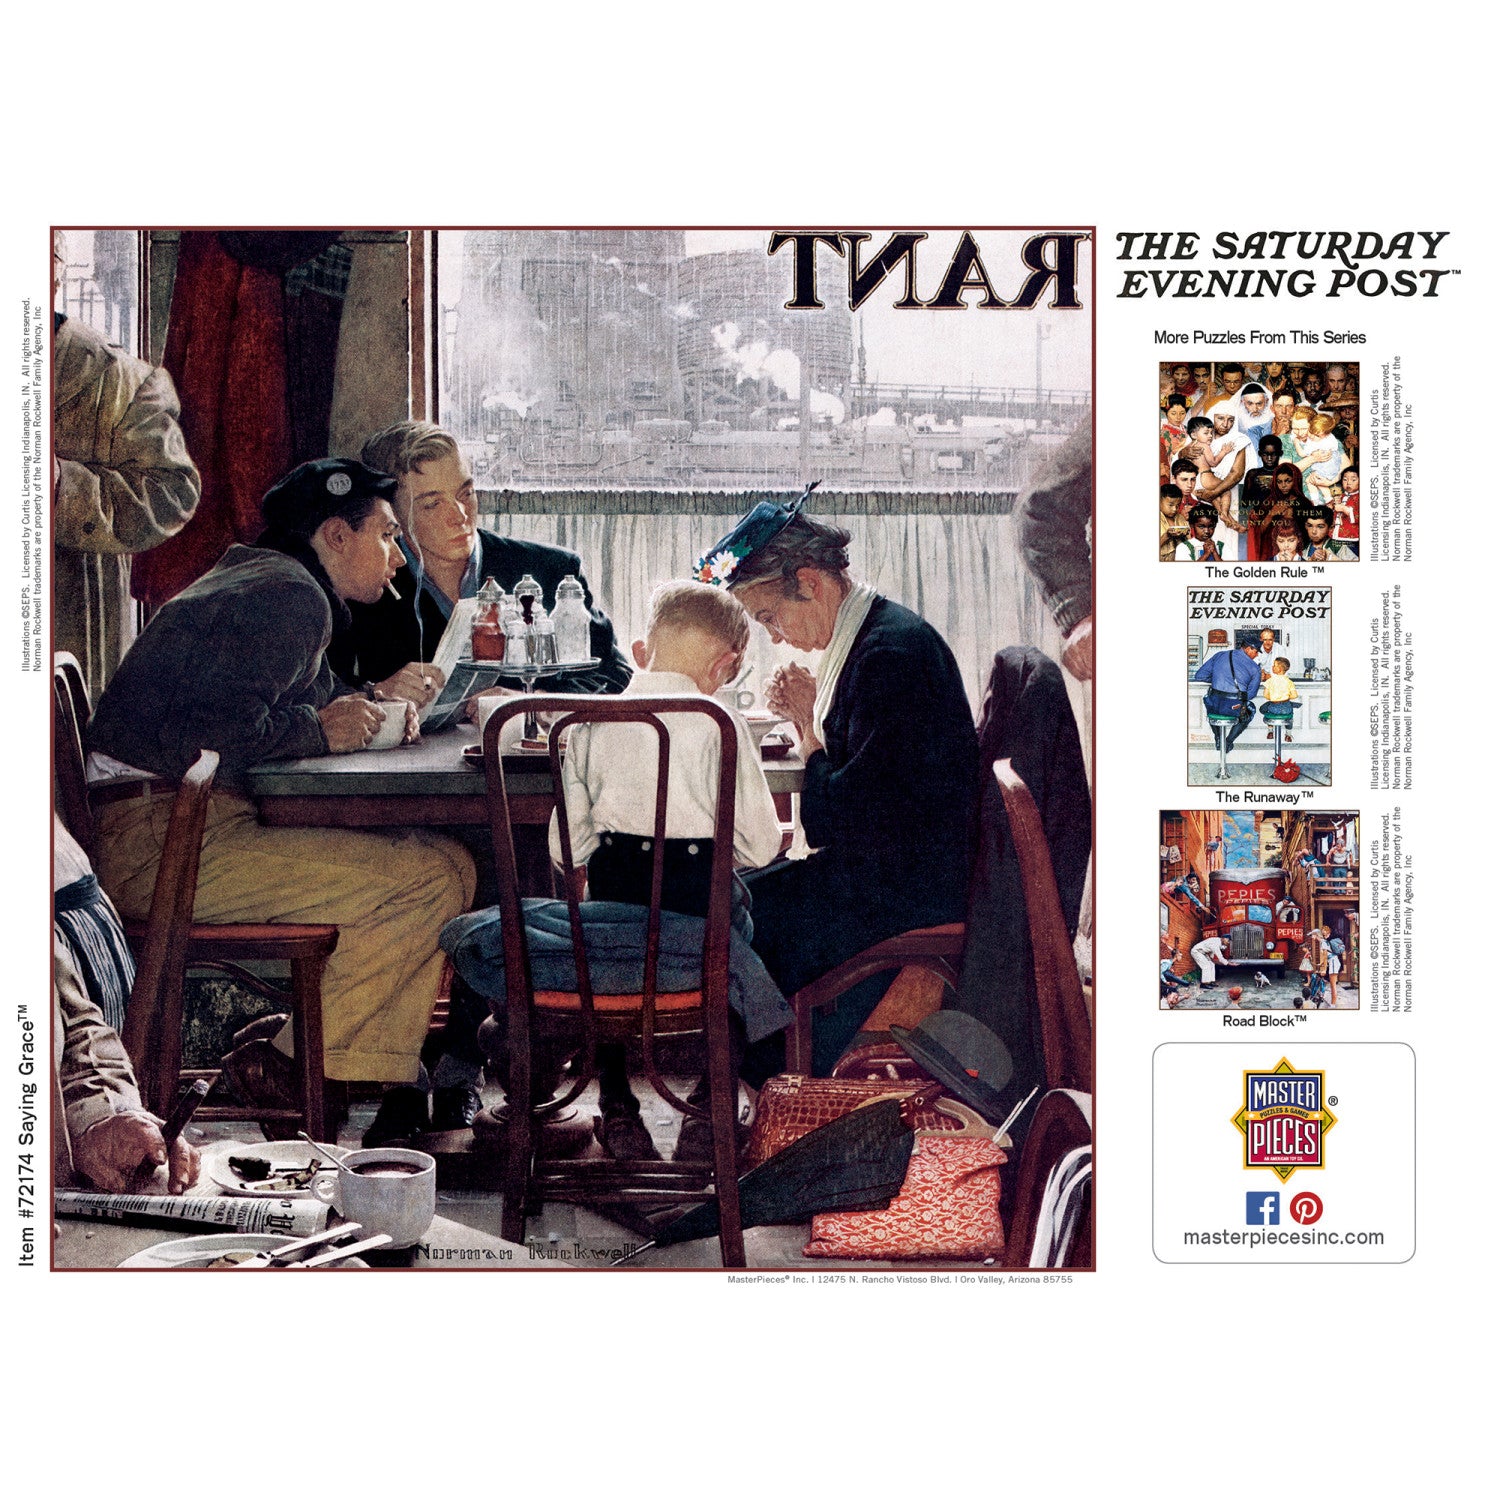 Saturday Evening Post - Saying Grace 1000 Piece Puzzle